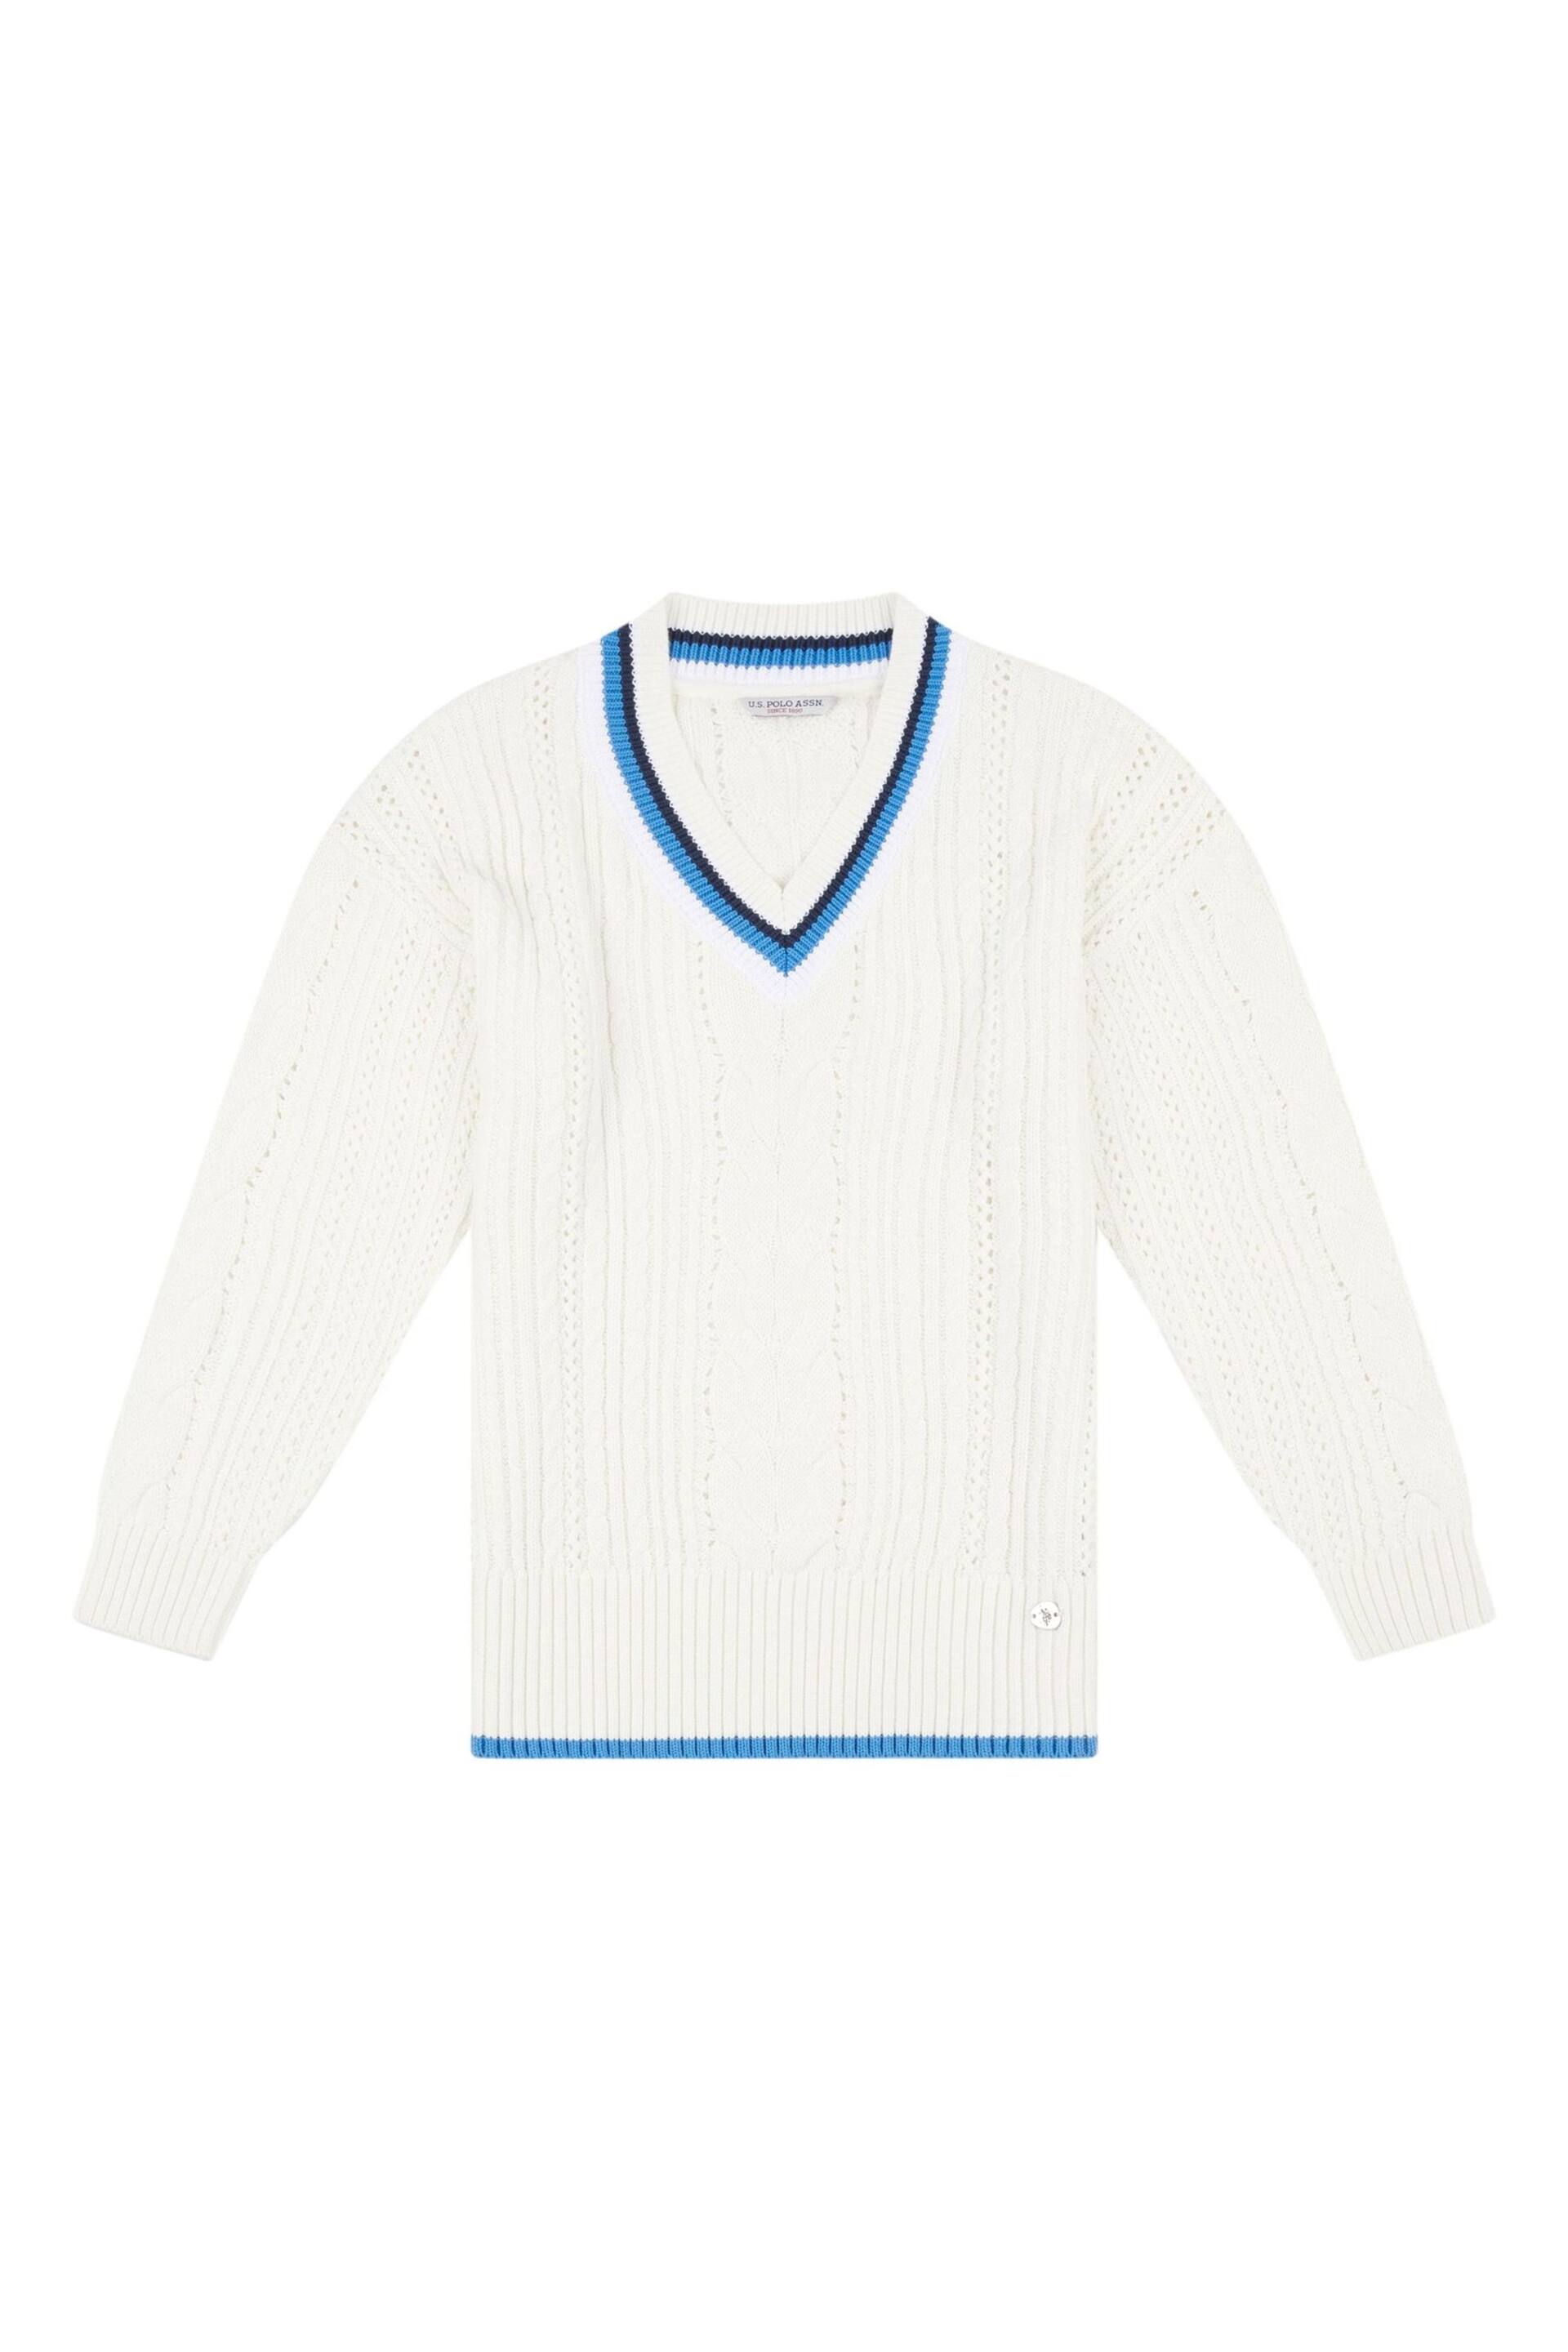 U.S. Polo Assn. Womens Cricket White Jumper - Image 6 of 8